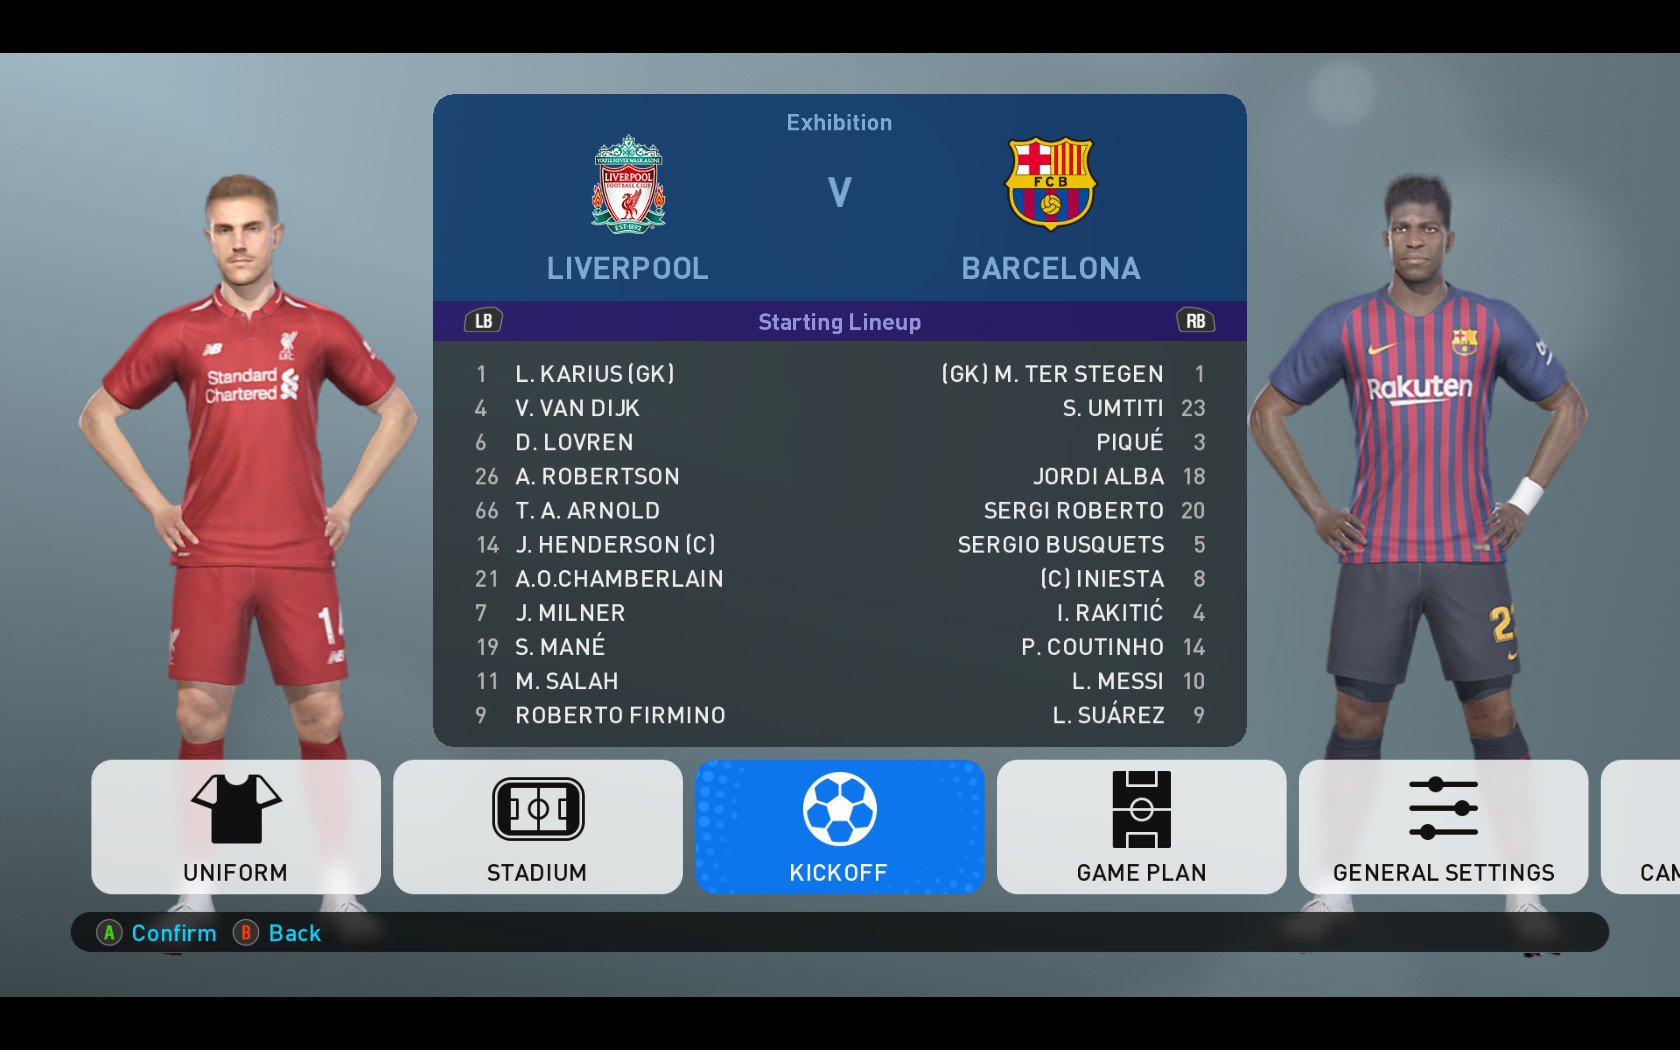 PES 2019 Team Selection Screen with Liverpool vs Barcelona